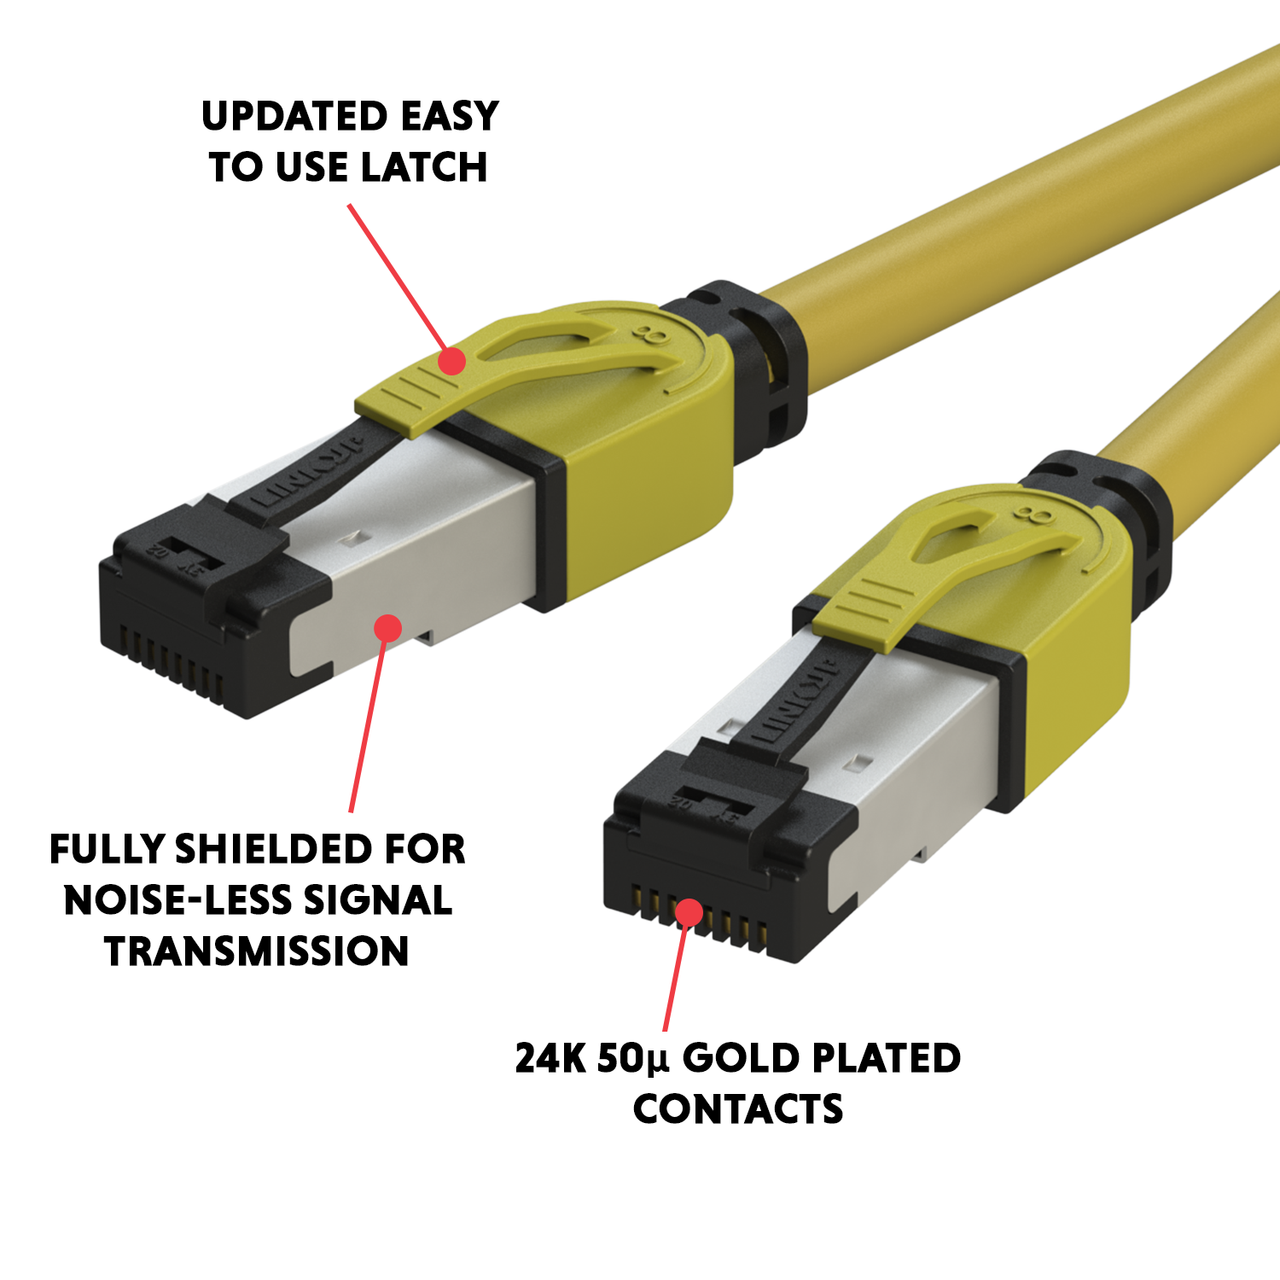 Cat 8 Ethernet RJ45 LAN Cable Super Speed 40Gbps Patch Network Gold Plated  (3ft), 1 - Harris Teeter